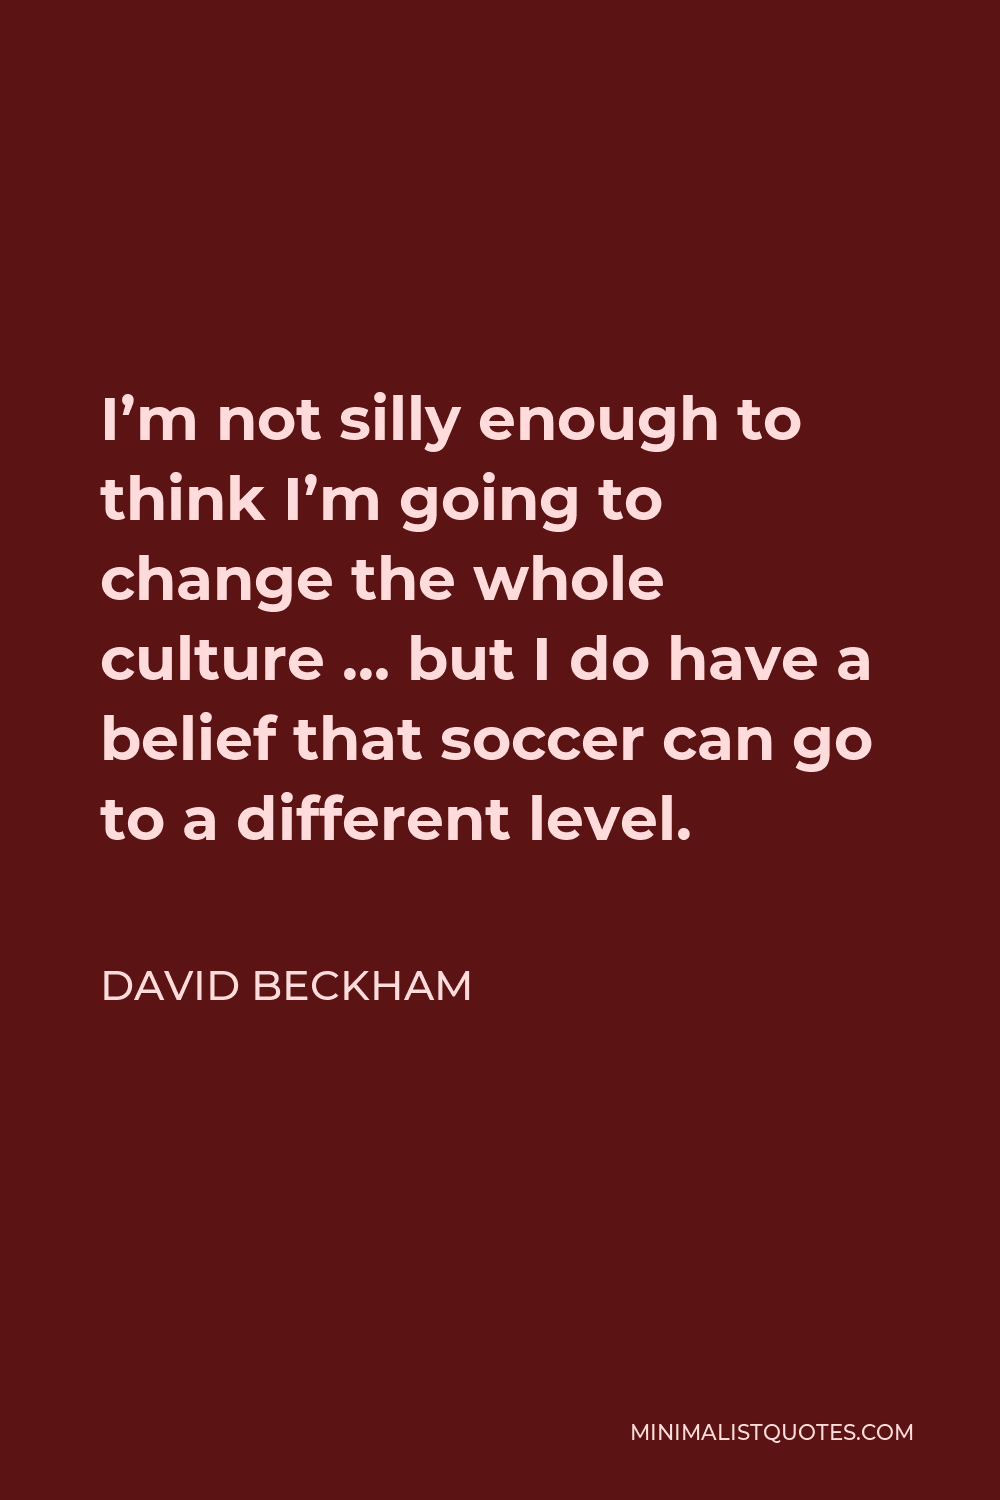 David Beckham Quote - I’m not silly enough to think I’m going to change the whole culture … but I do have a belief that soccer can go to a different level.